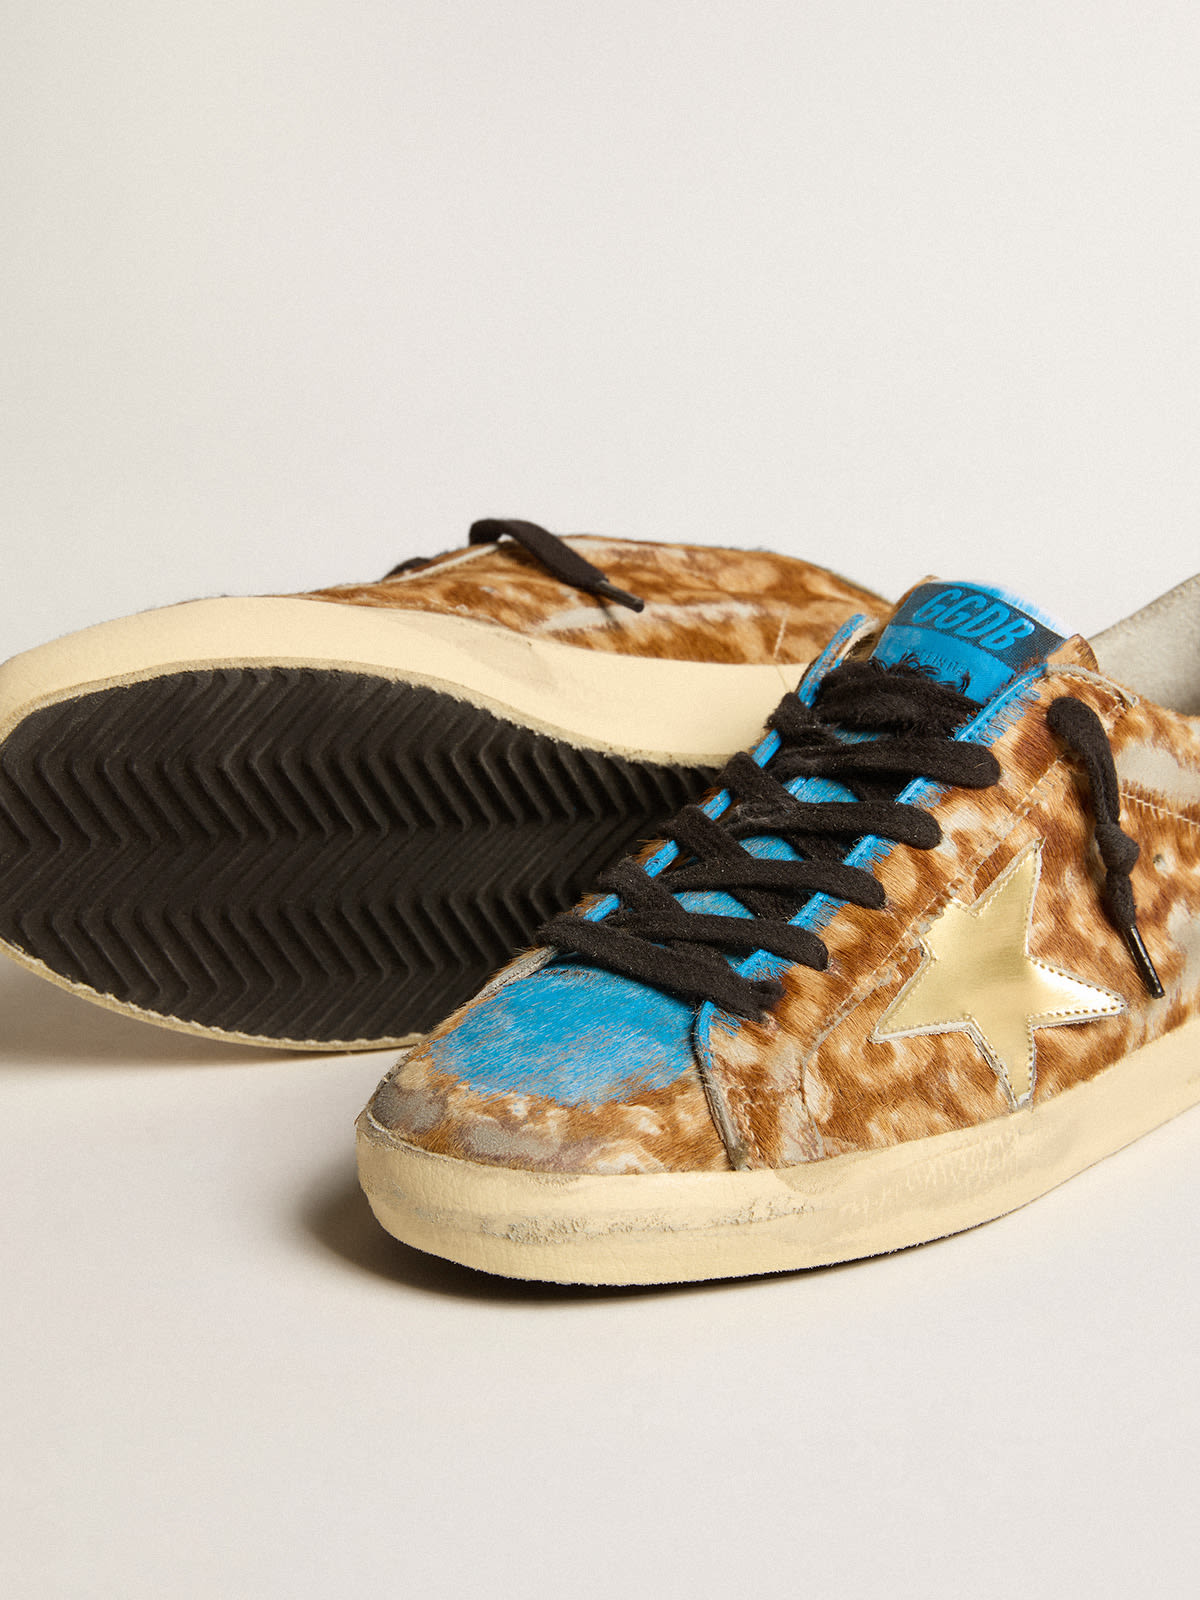 Golden Goose - Men’s Super-Star LAB in leopard pony skin with gold star and gray heel tab in 